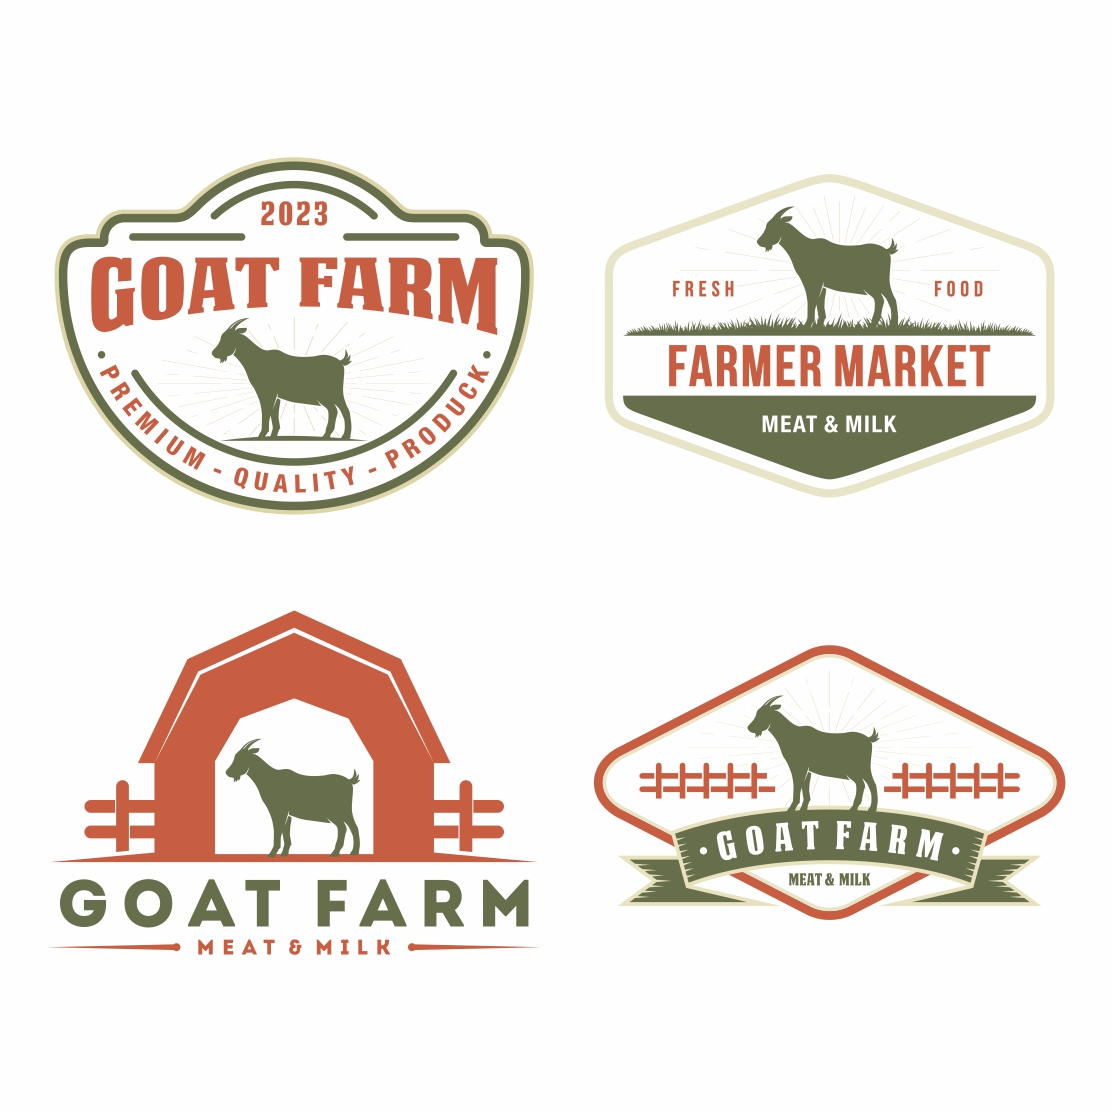 Goat Farm logo design collection - only 10$ preview image.